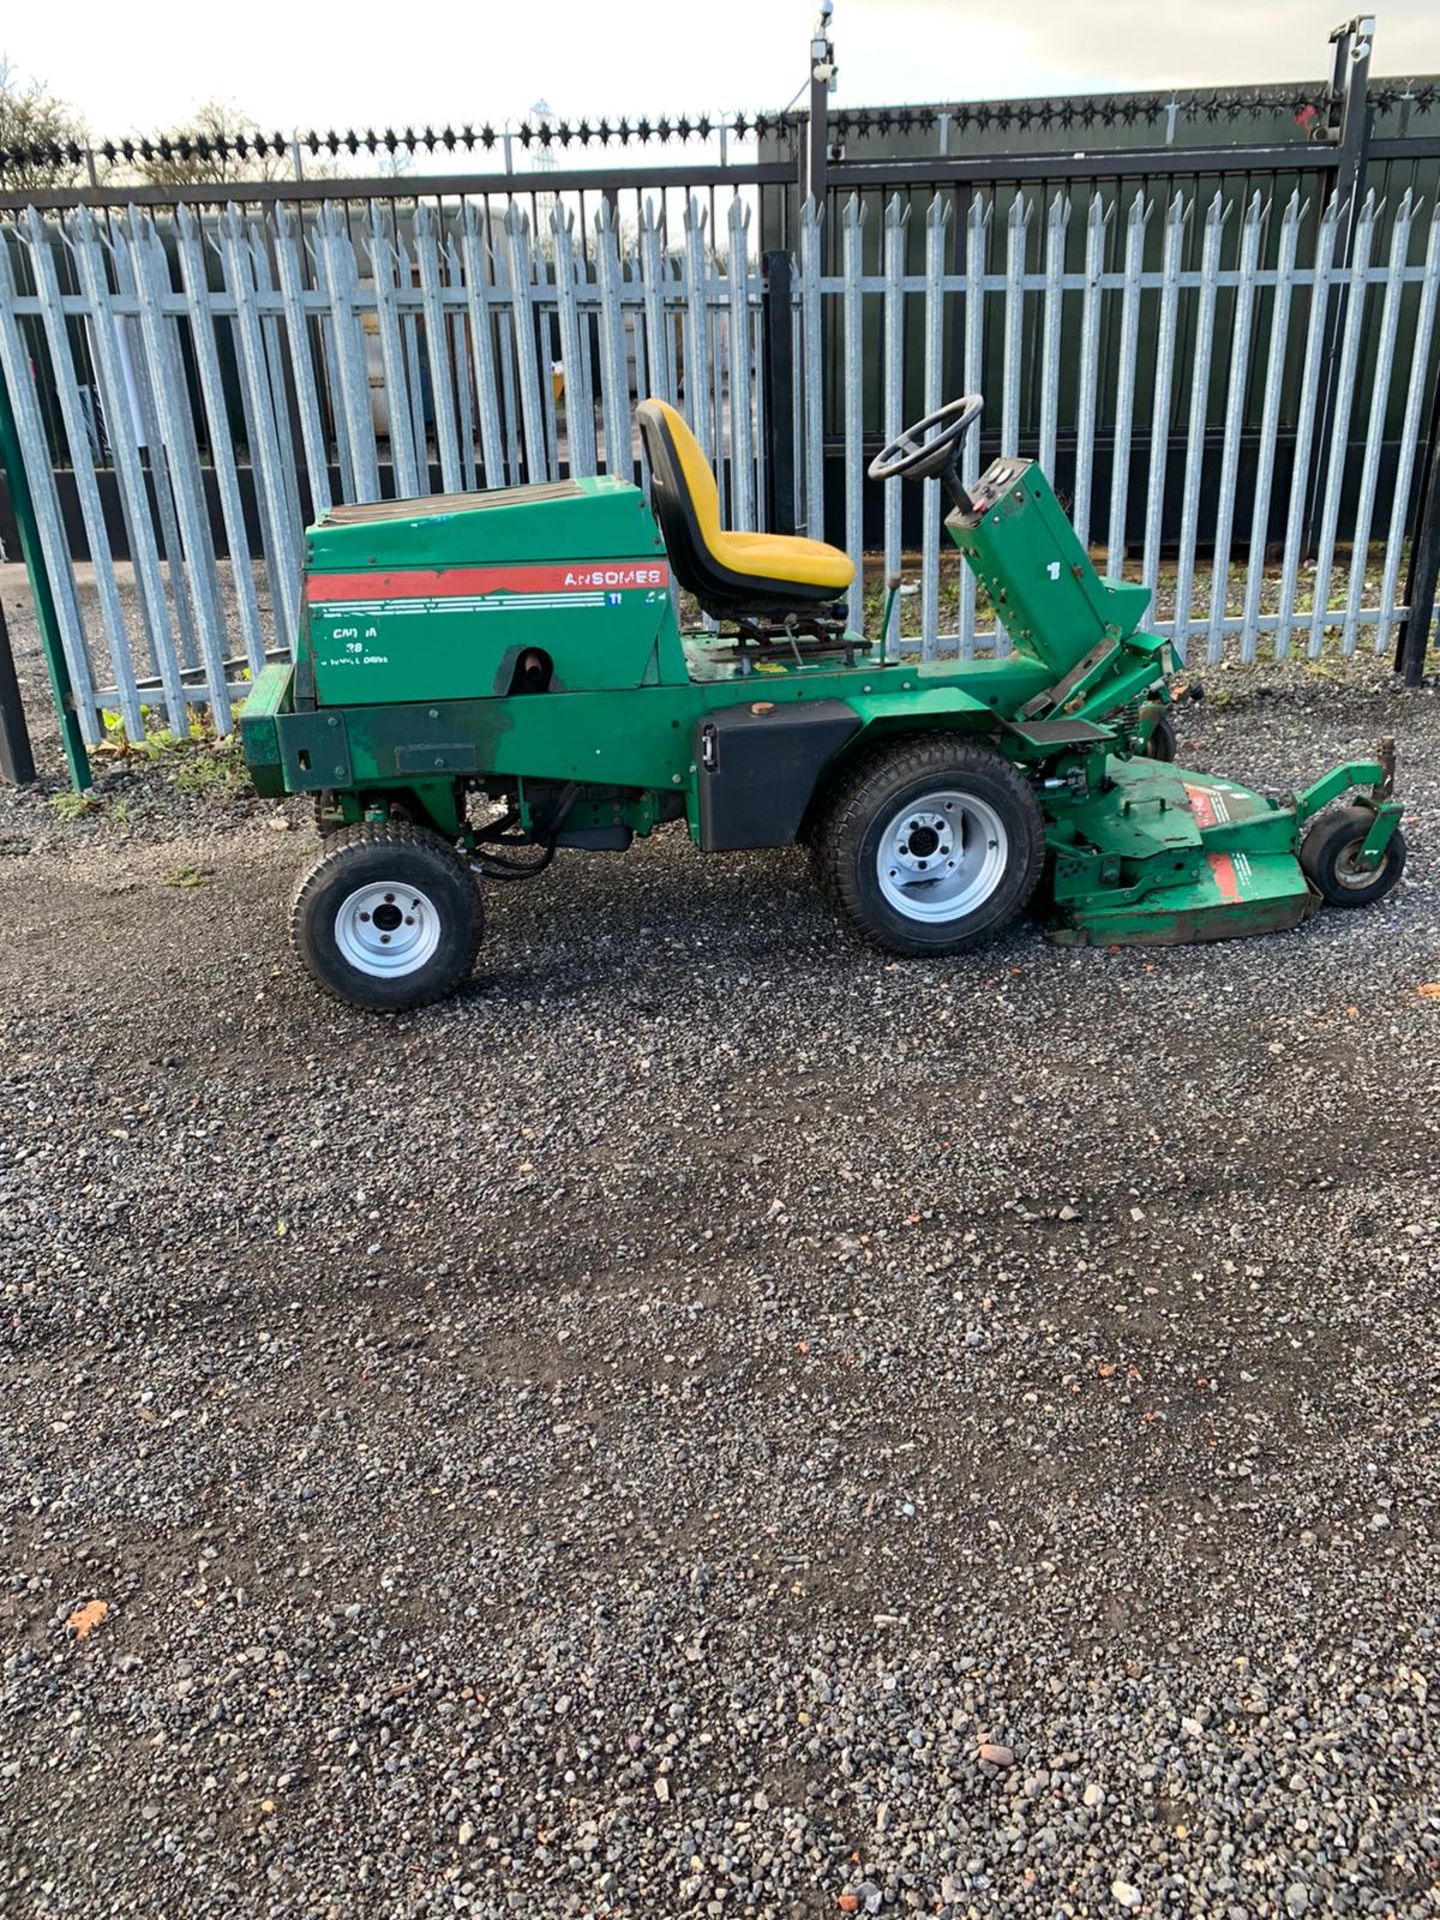 RANSOMES FRONTLINE 728D 4 WHEEL DRIVE DIESEL ROTARY MOWER OUTFRONT DECK 4WD *PLUS VAT* - Image 3 of 10